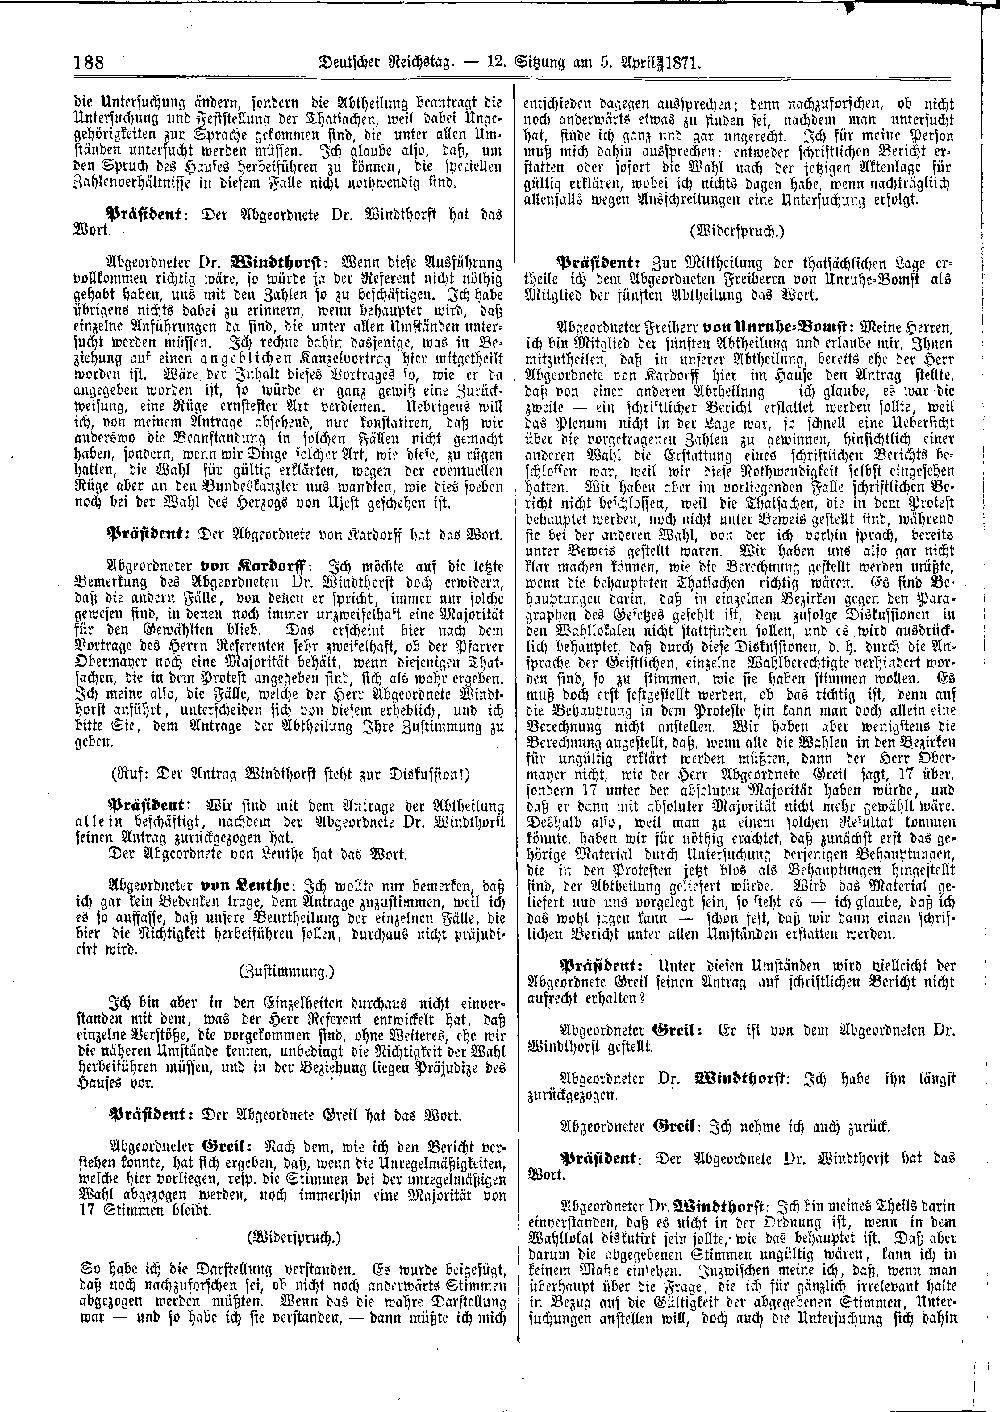 Scan of page 188